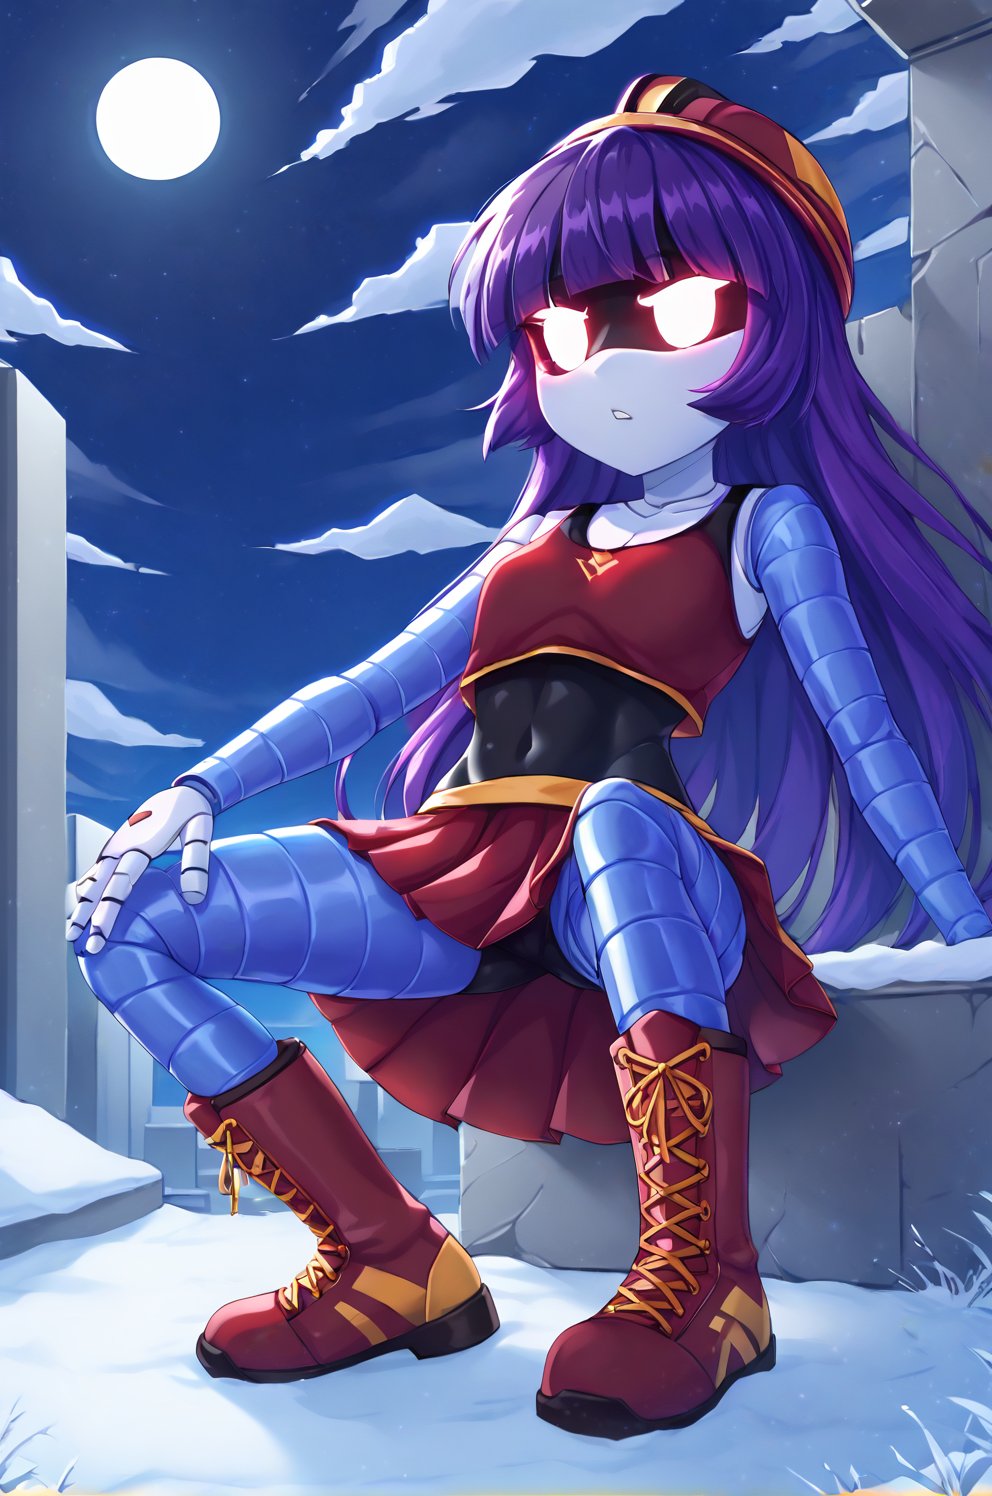 score_9, score_8_up, score_7_up, source_anime, 
BREAK, 
MD-Doll, 1girl, solo, android, red helmet, long purple hair, red crop top, black tank top, red skirt, red boots, robot, joints, mechanical arms, mechanical legs, 
BREAK, 
(heart hands:1.3), looking at viewer, standing, full body, 
BREAK, 
outdoors, city, ruins, snow, night, dark, 
(cinematic lighting, dramatic lighting, dark lighting), 
BREAK, 
masterpiece, epic, brutal, best quality